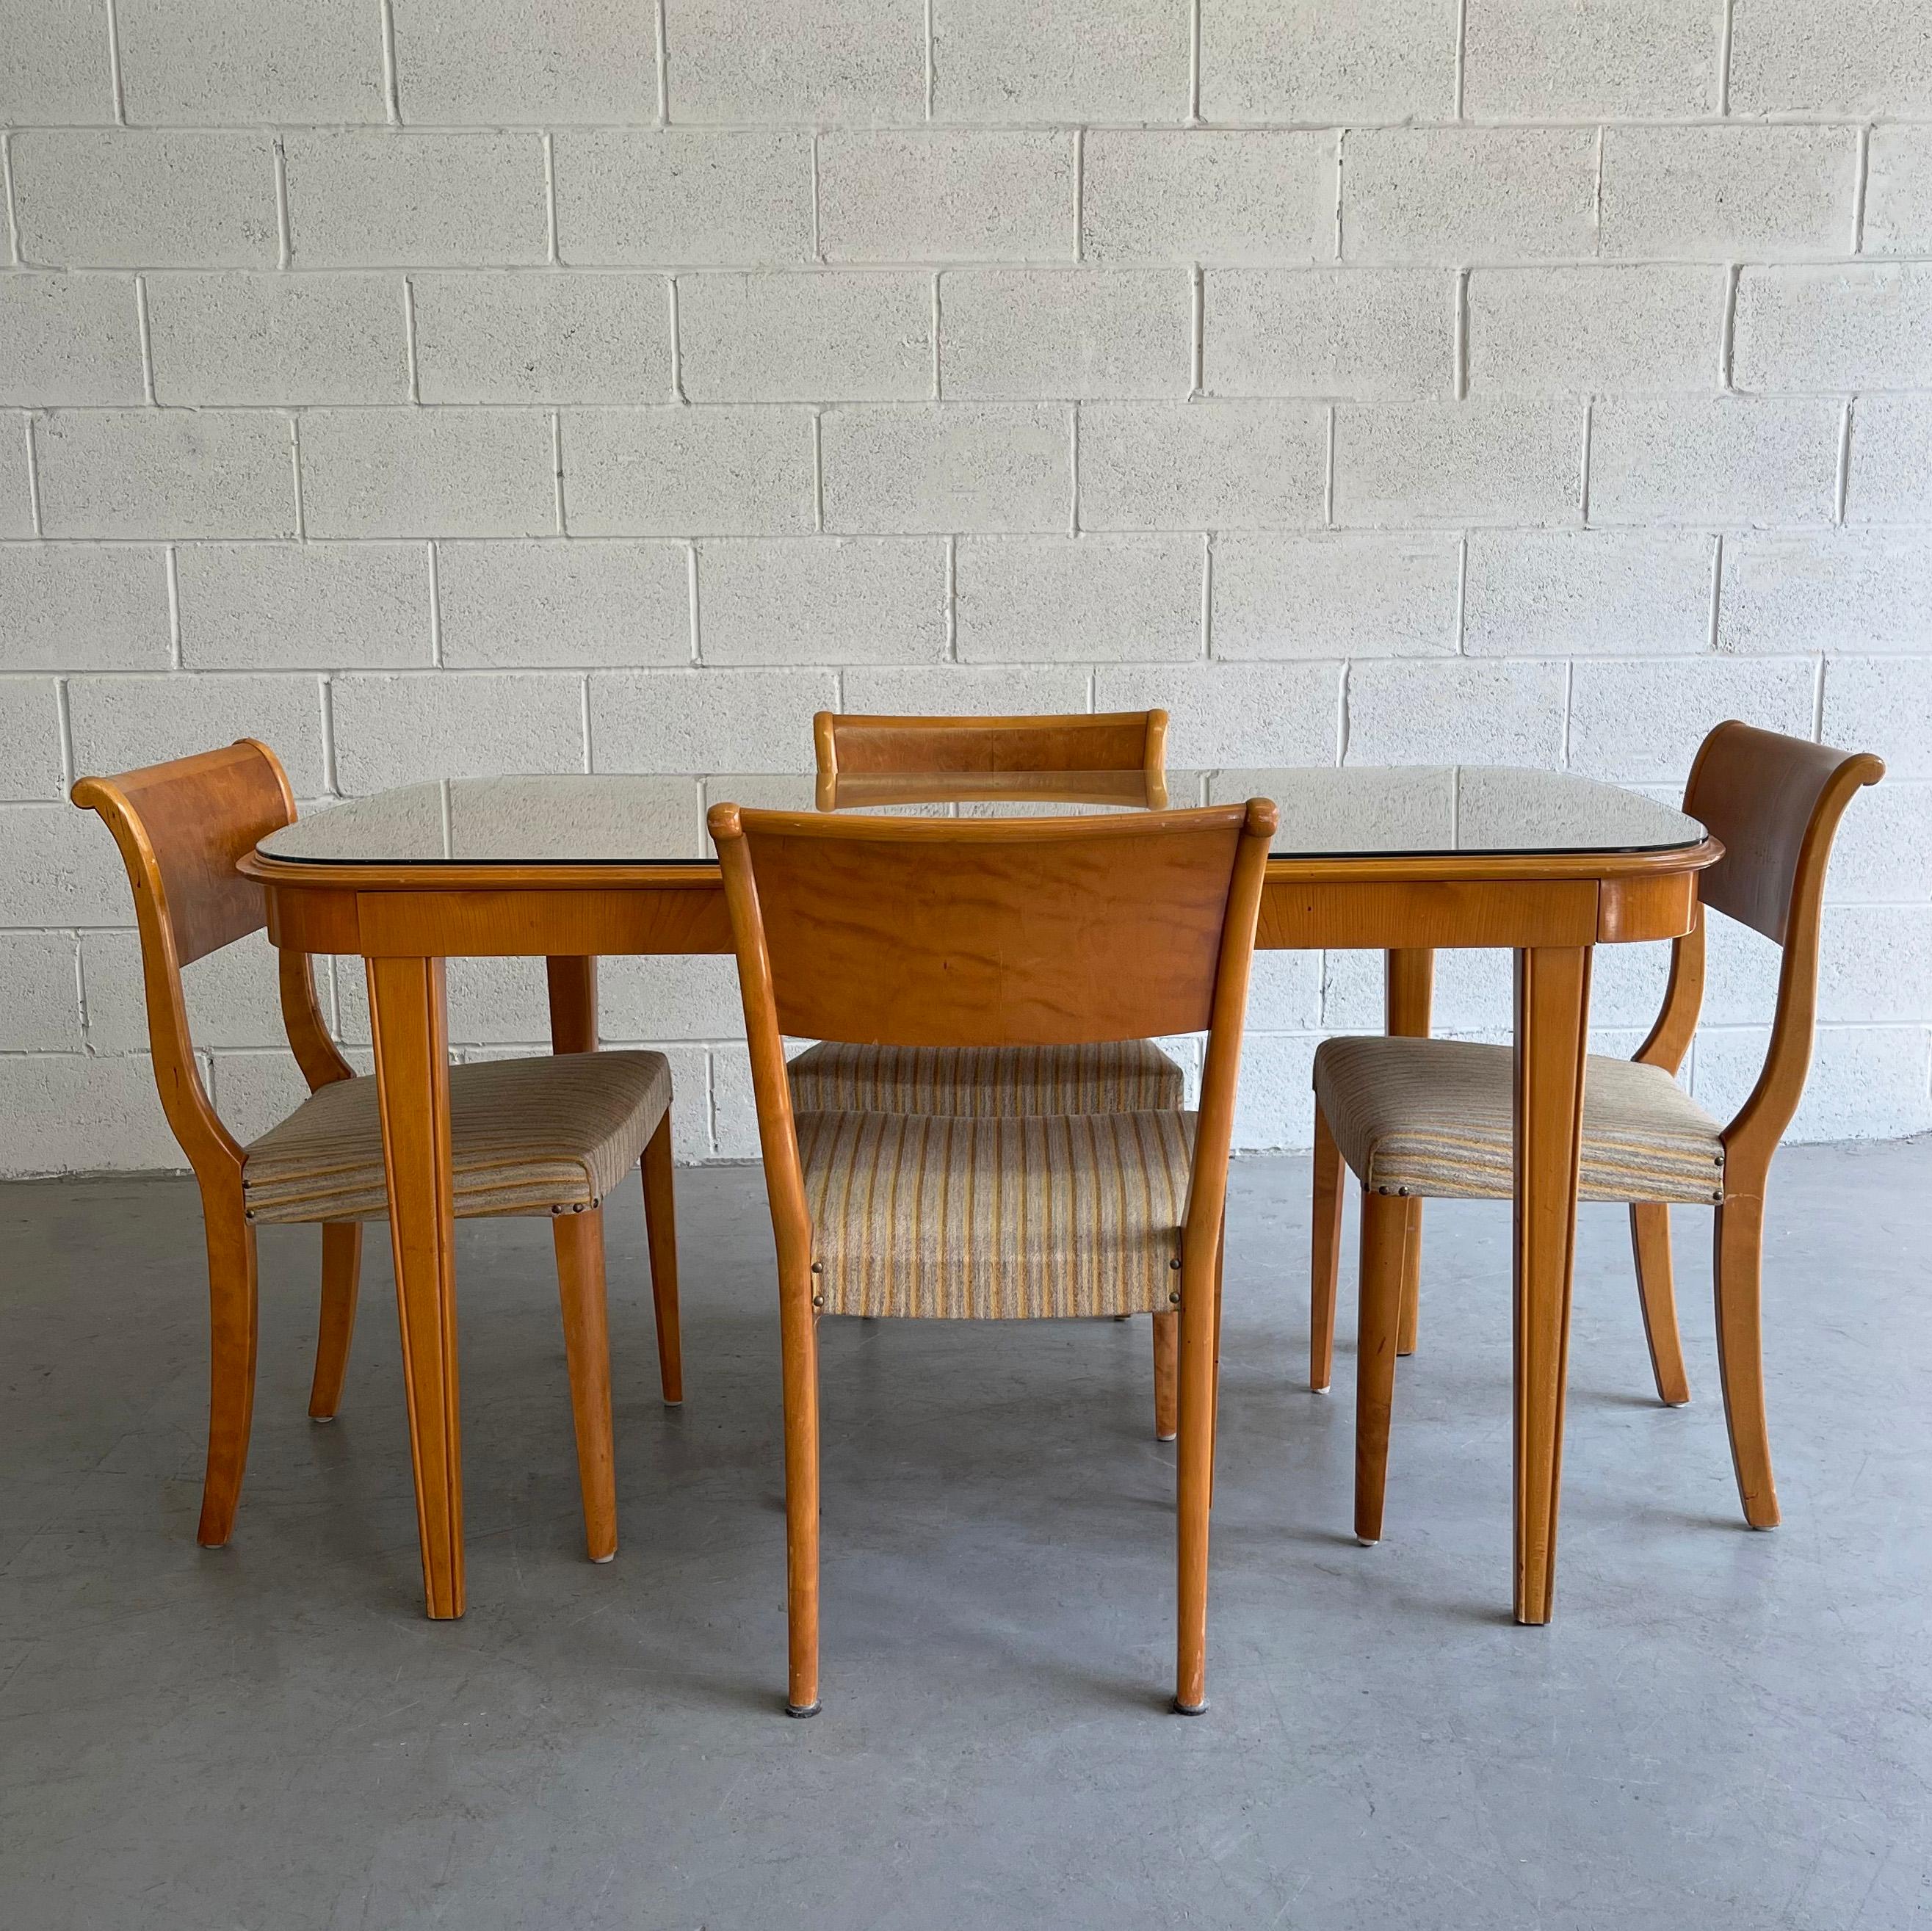 Midcentury, Biedermeier style, stainwood dining set includes a dining table with contrasting grain with removeable glass top that extends from 56 - 79 inches with 4 matching chairs that measure 18 x 18 x 31.5 inches, 16.5 inches seat ht. The set is